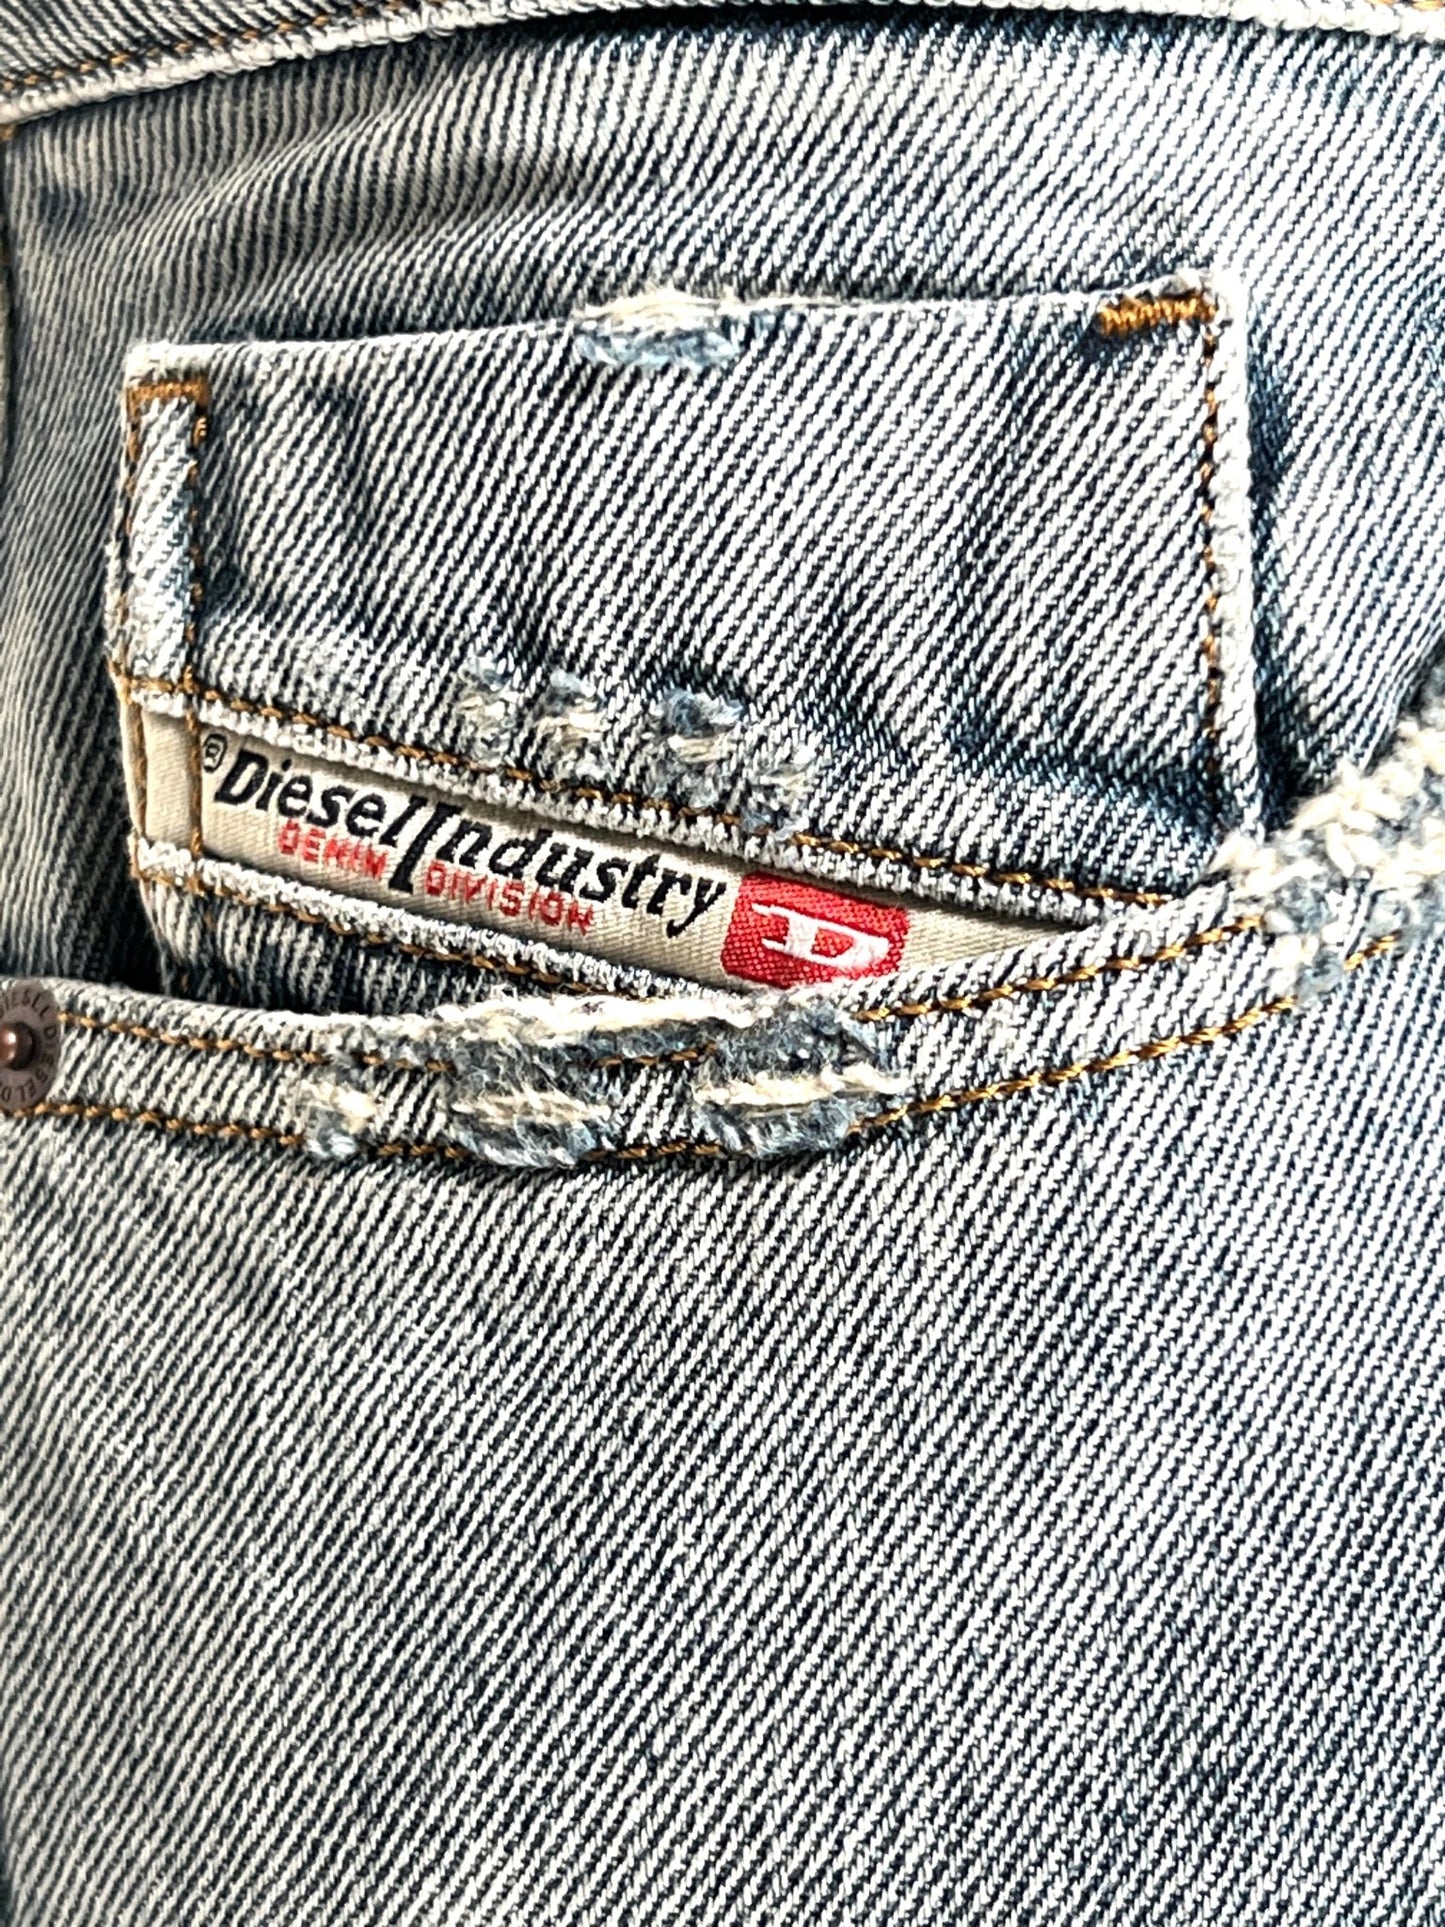 A close up of the pocket of a pair of DIESEL light blue 1955 jeans 9C90.